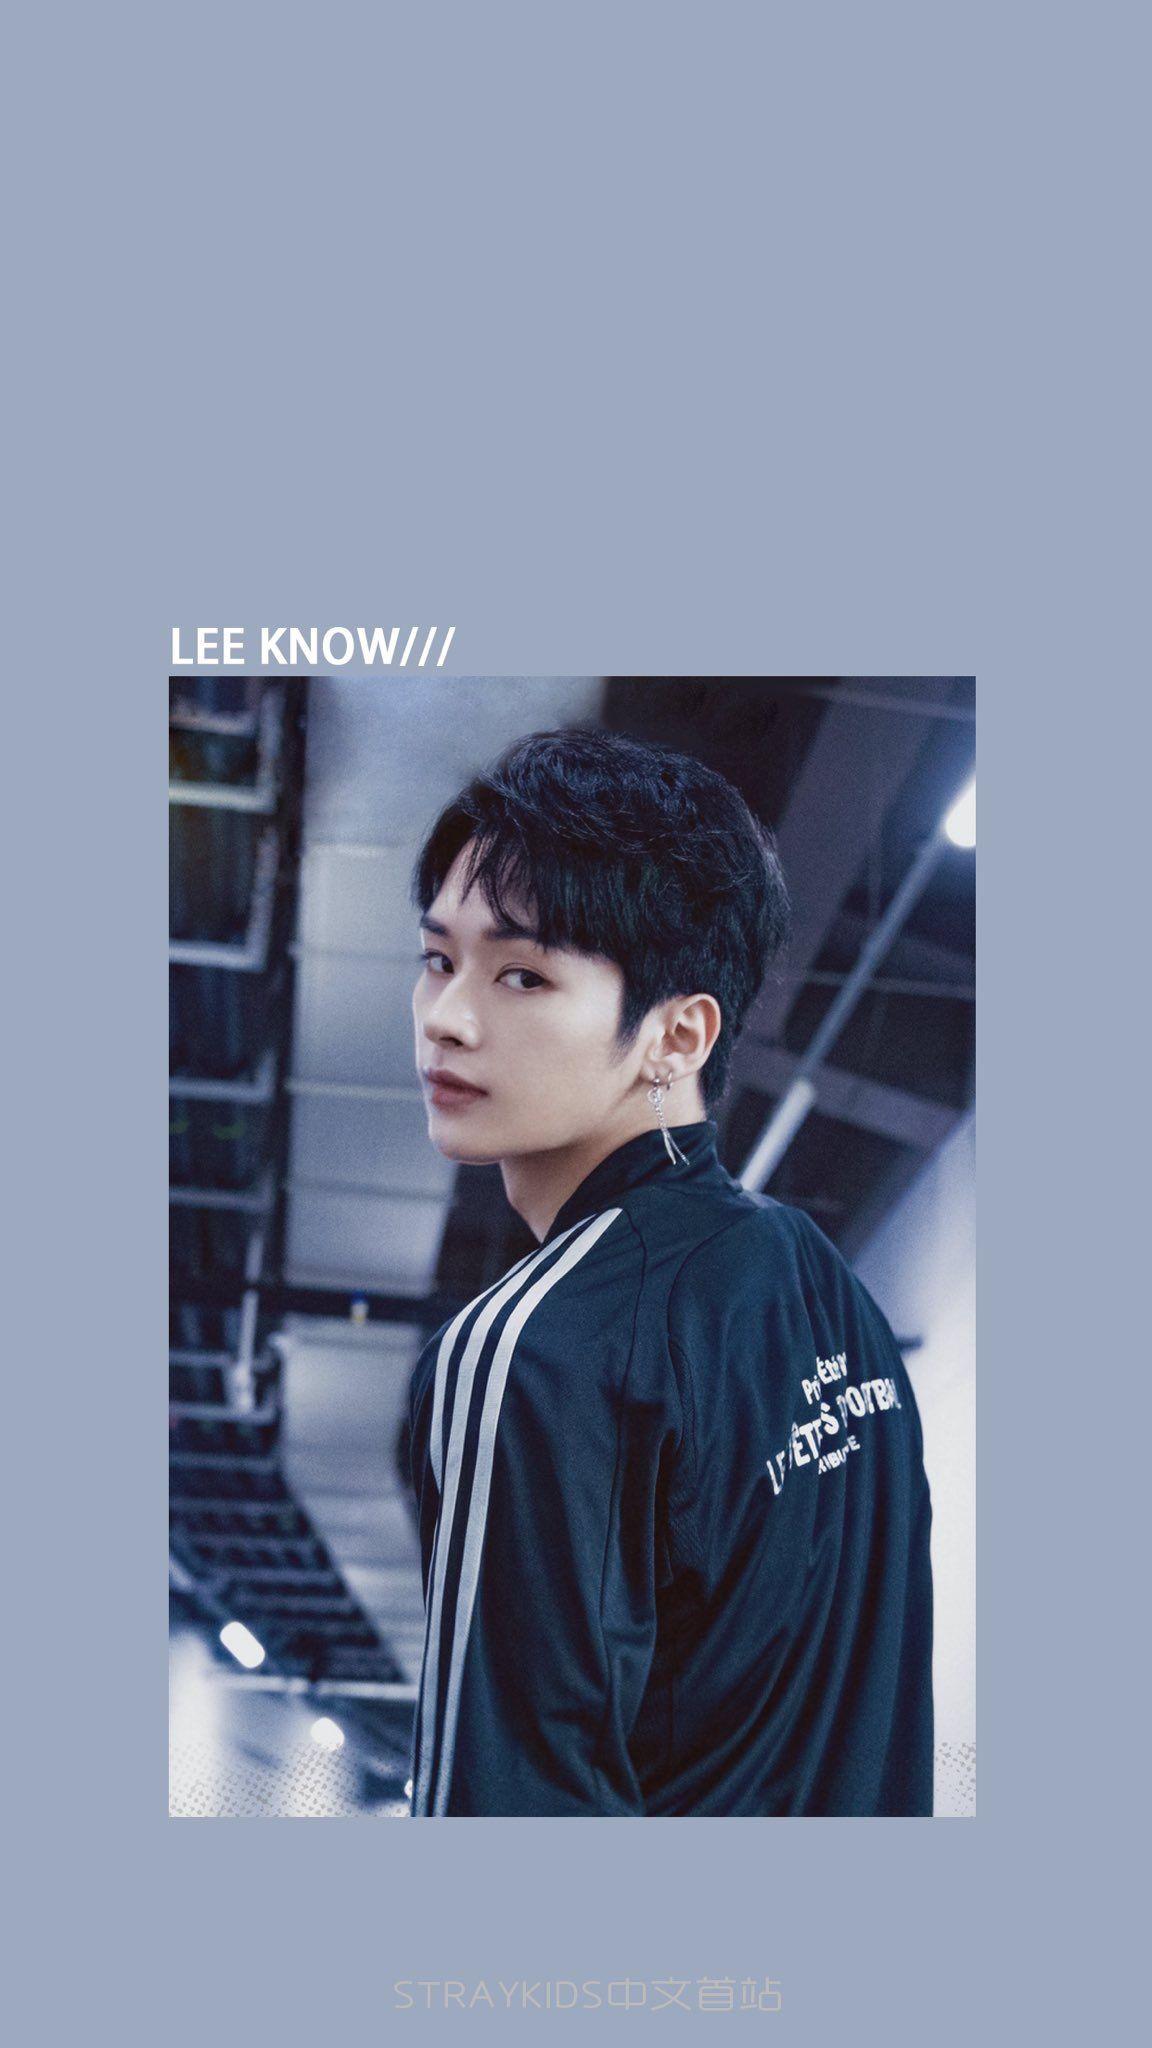 Know lee STRAY KIDS